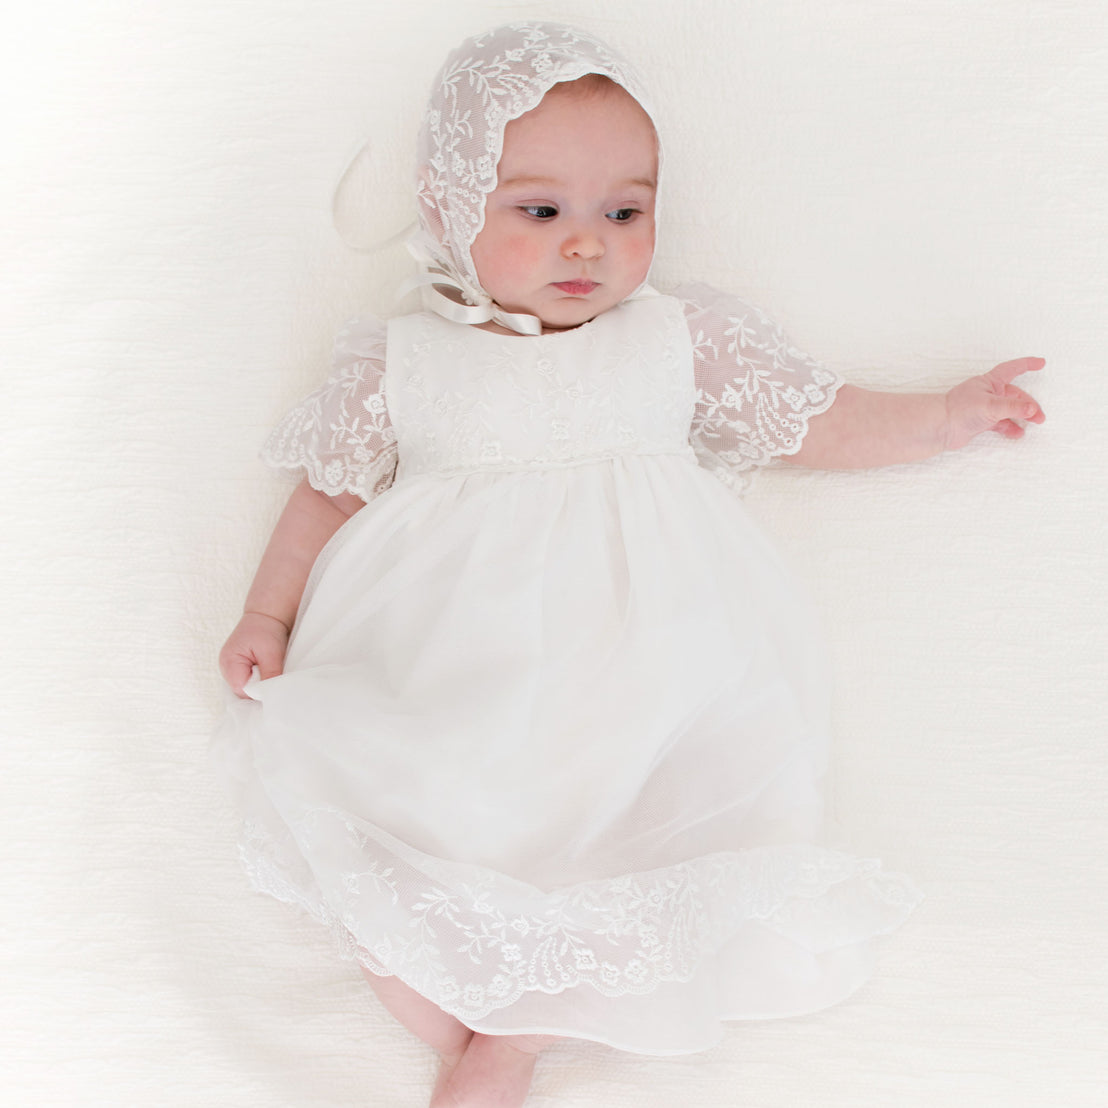 alternative photo of baby girl wearing lace bonnet and the Ella boutique romper dress